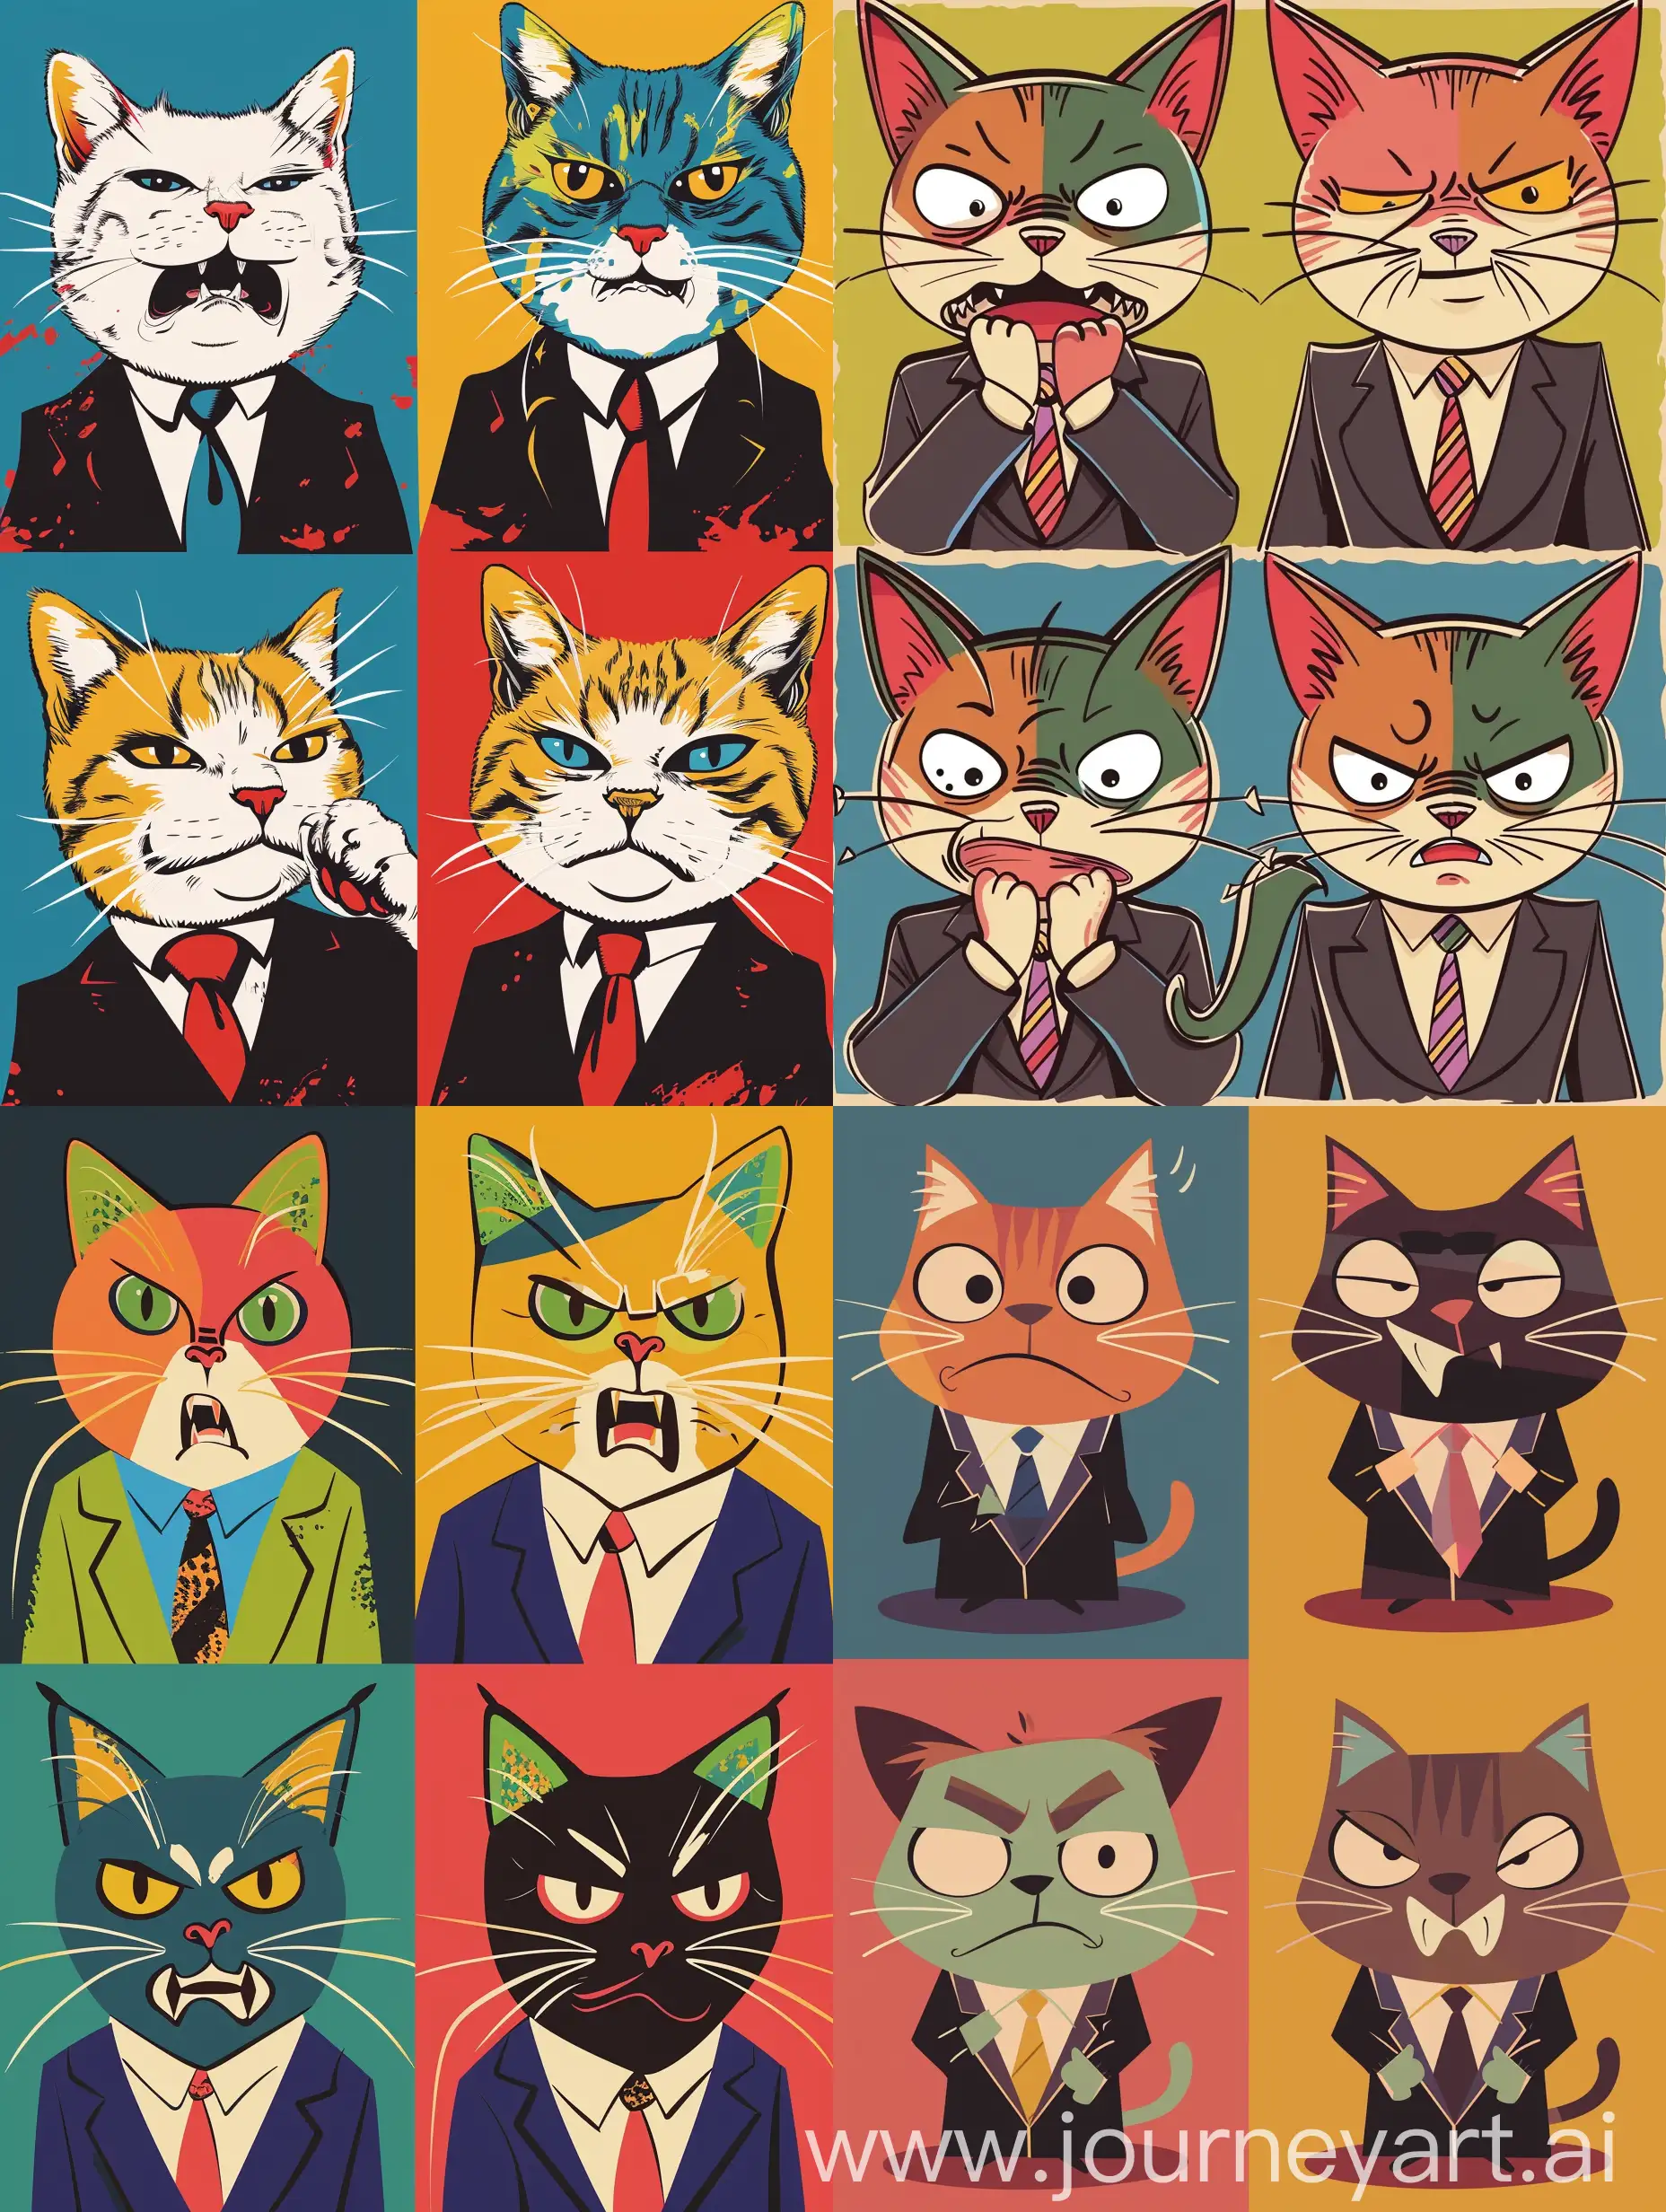 cat, wearing a suit and tie,fourcute poses and expressions, simlesad, angry, anticipation.different emotions,multiple poss and expressions, childish,vectorillustration,henry maisse's colors,henrey mattisse's lithograph,colorfulgio，Zoom Out 2x--niji 5=-styleexpressive
